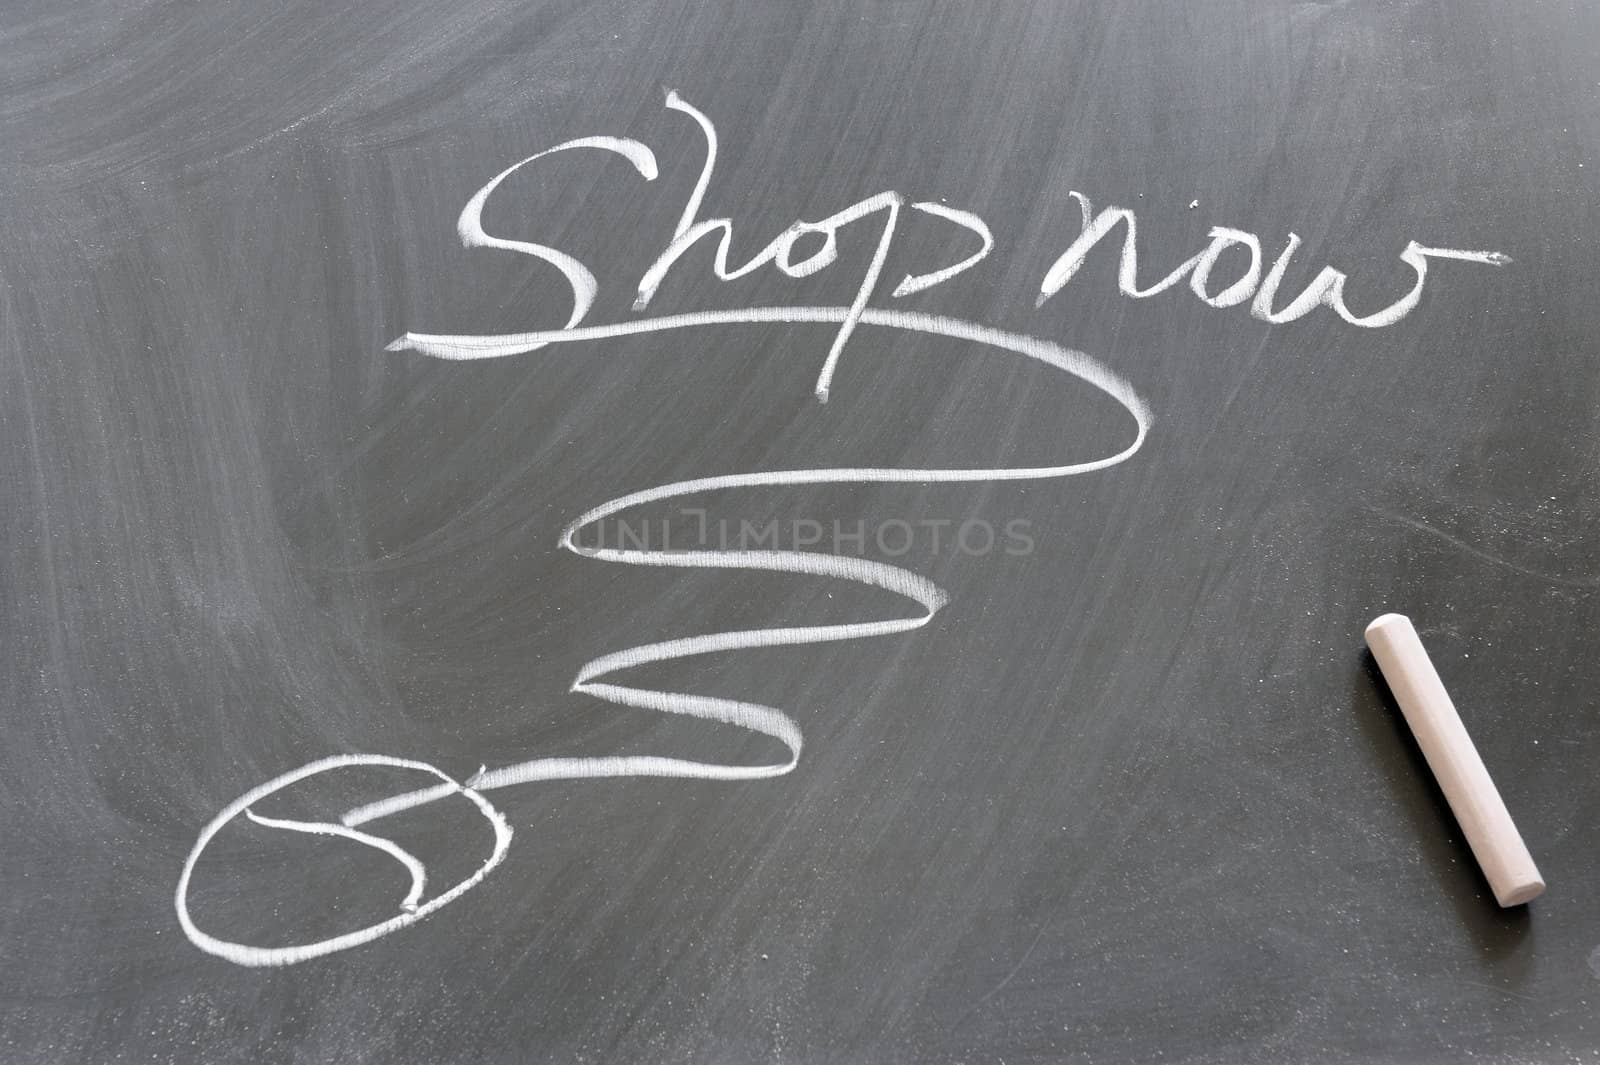 "Shop now" word and computer mouse drawn on the chalkboard